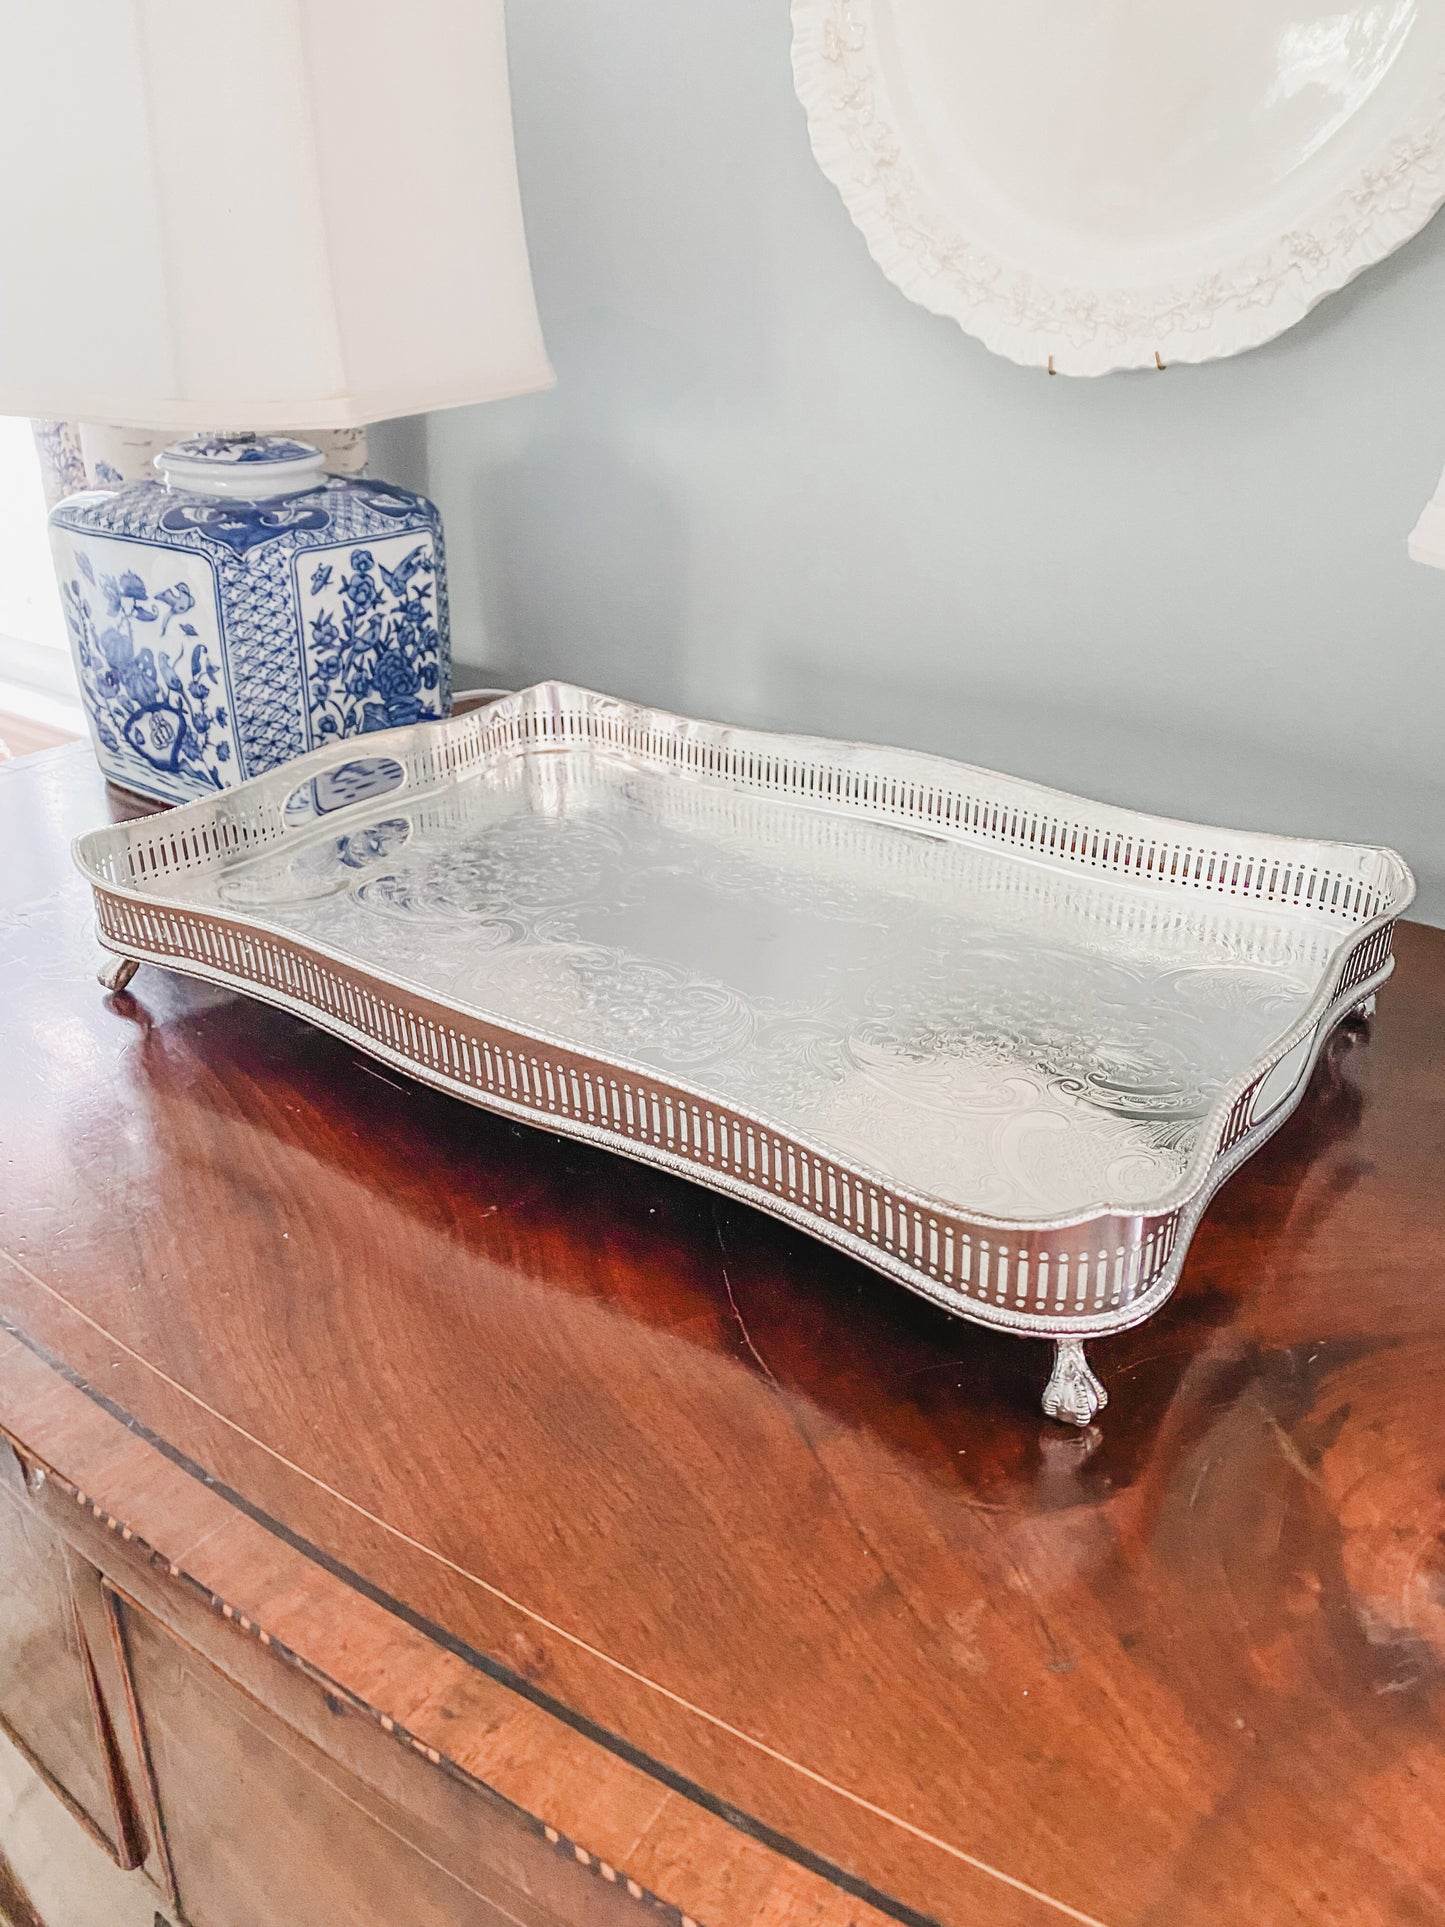 Exquisite Gallery Tray